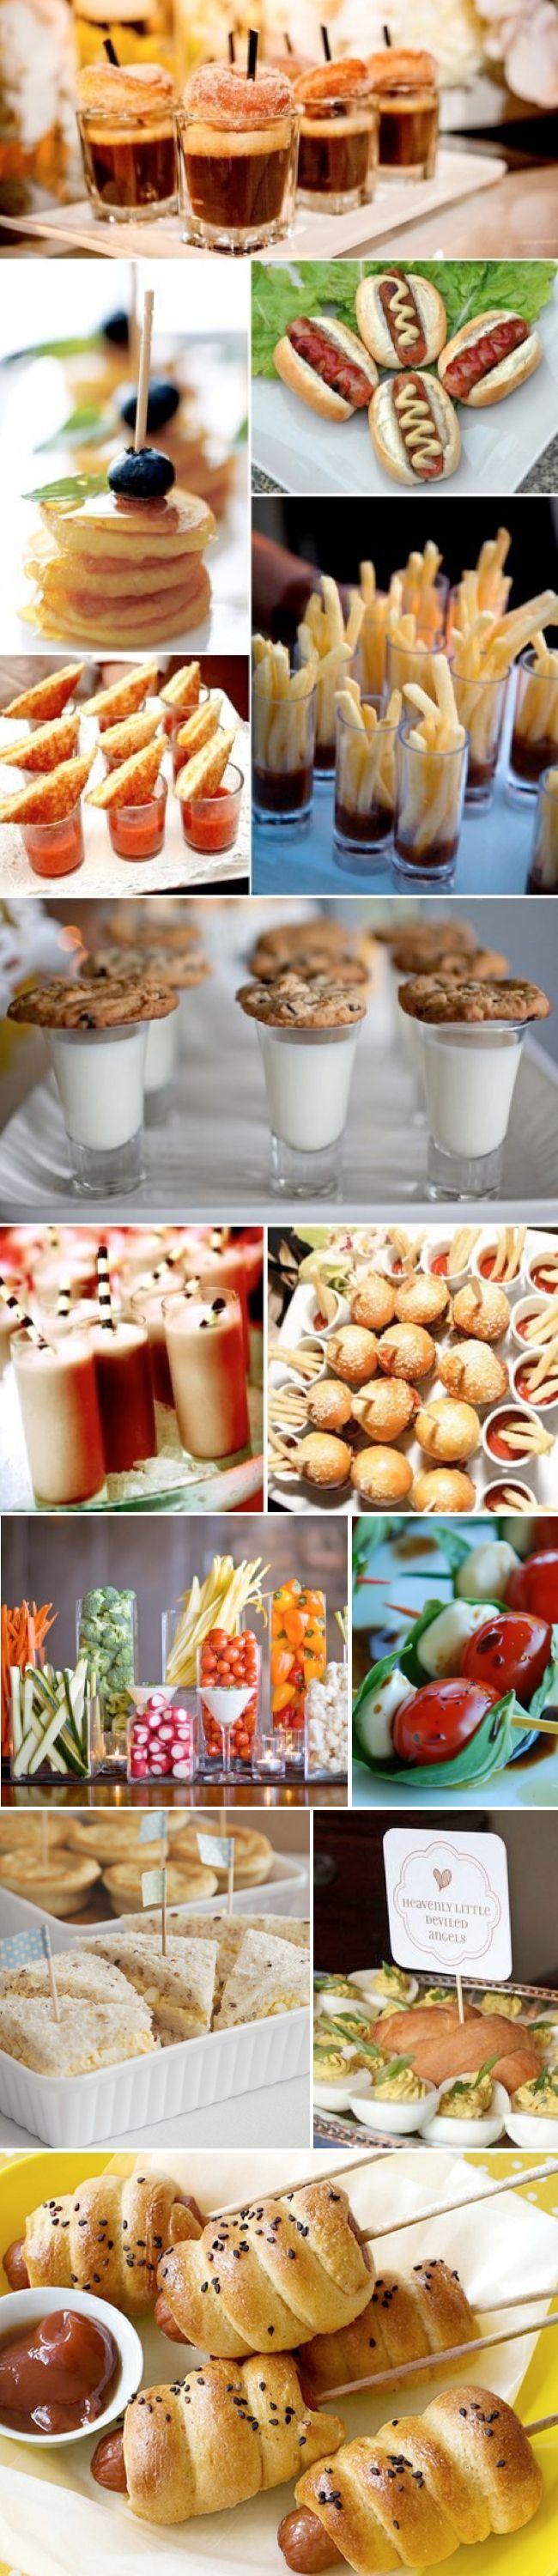 Wedding - Finger Foods For That Party You’ve Been Planning (38 Photos)